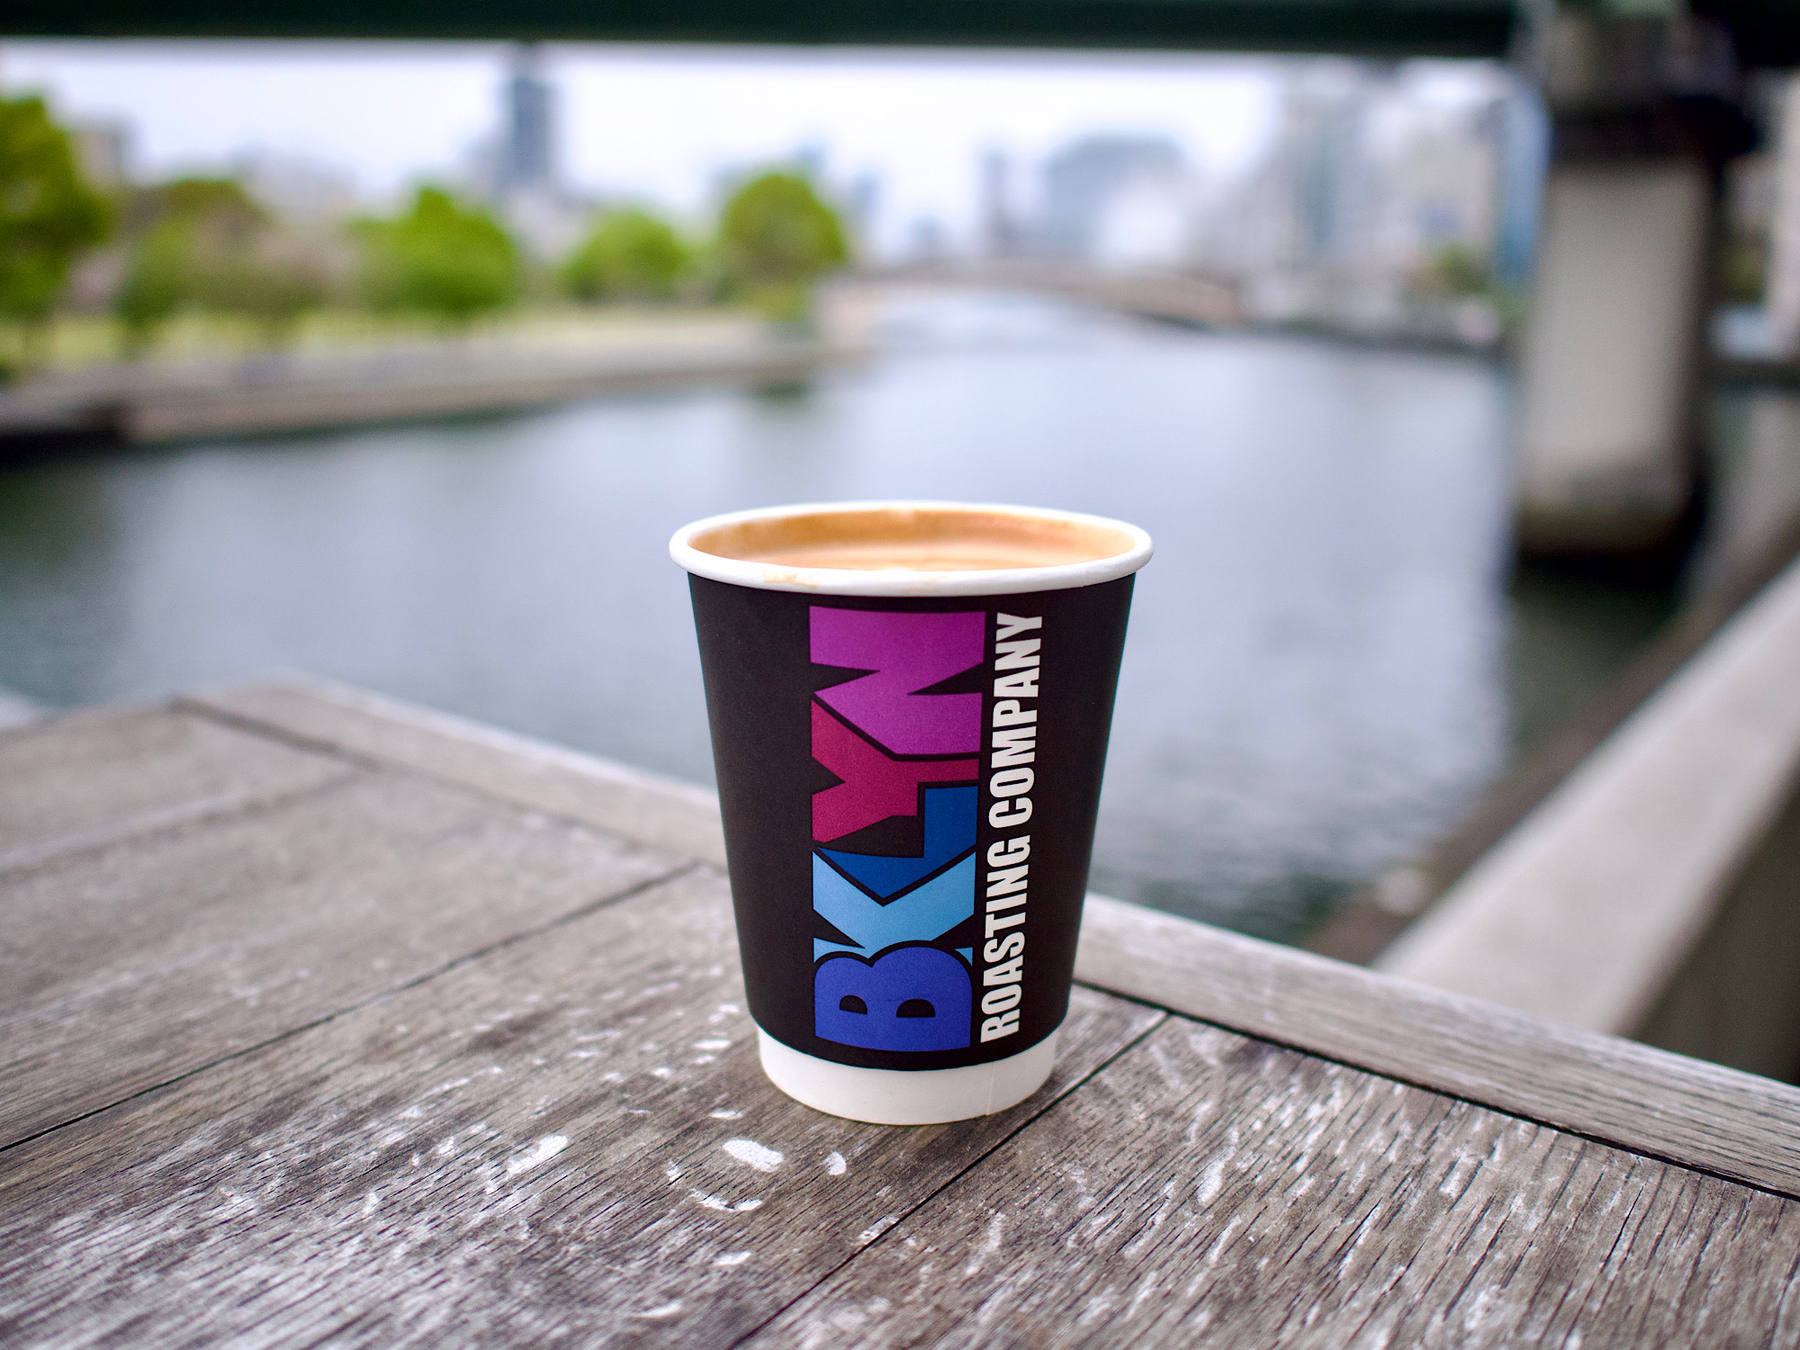 Paper Coffee cup with Brooklyn Roasters branding on a weather worn wooden table with a river in the background